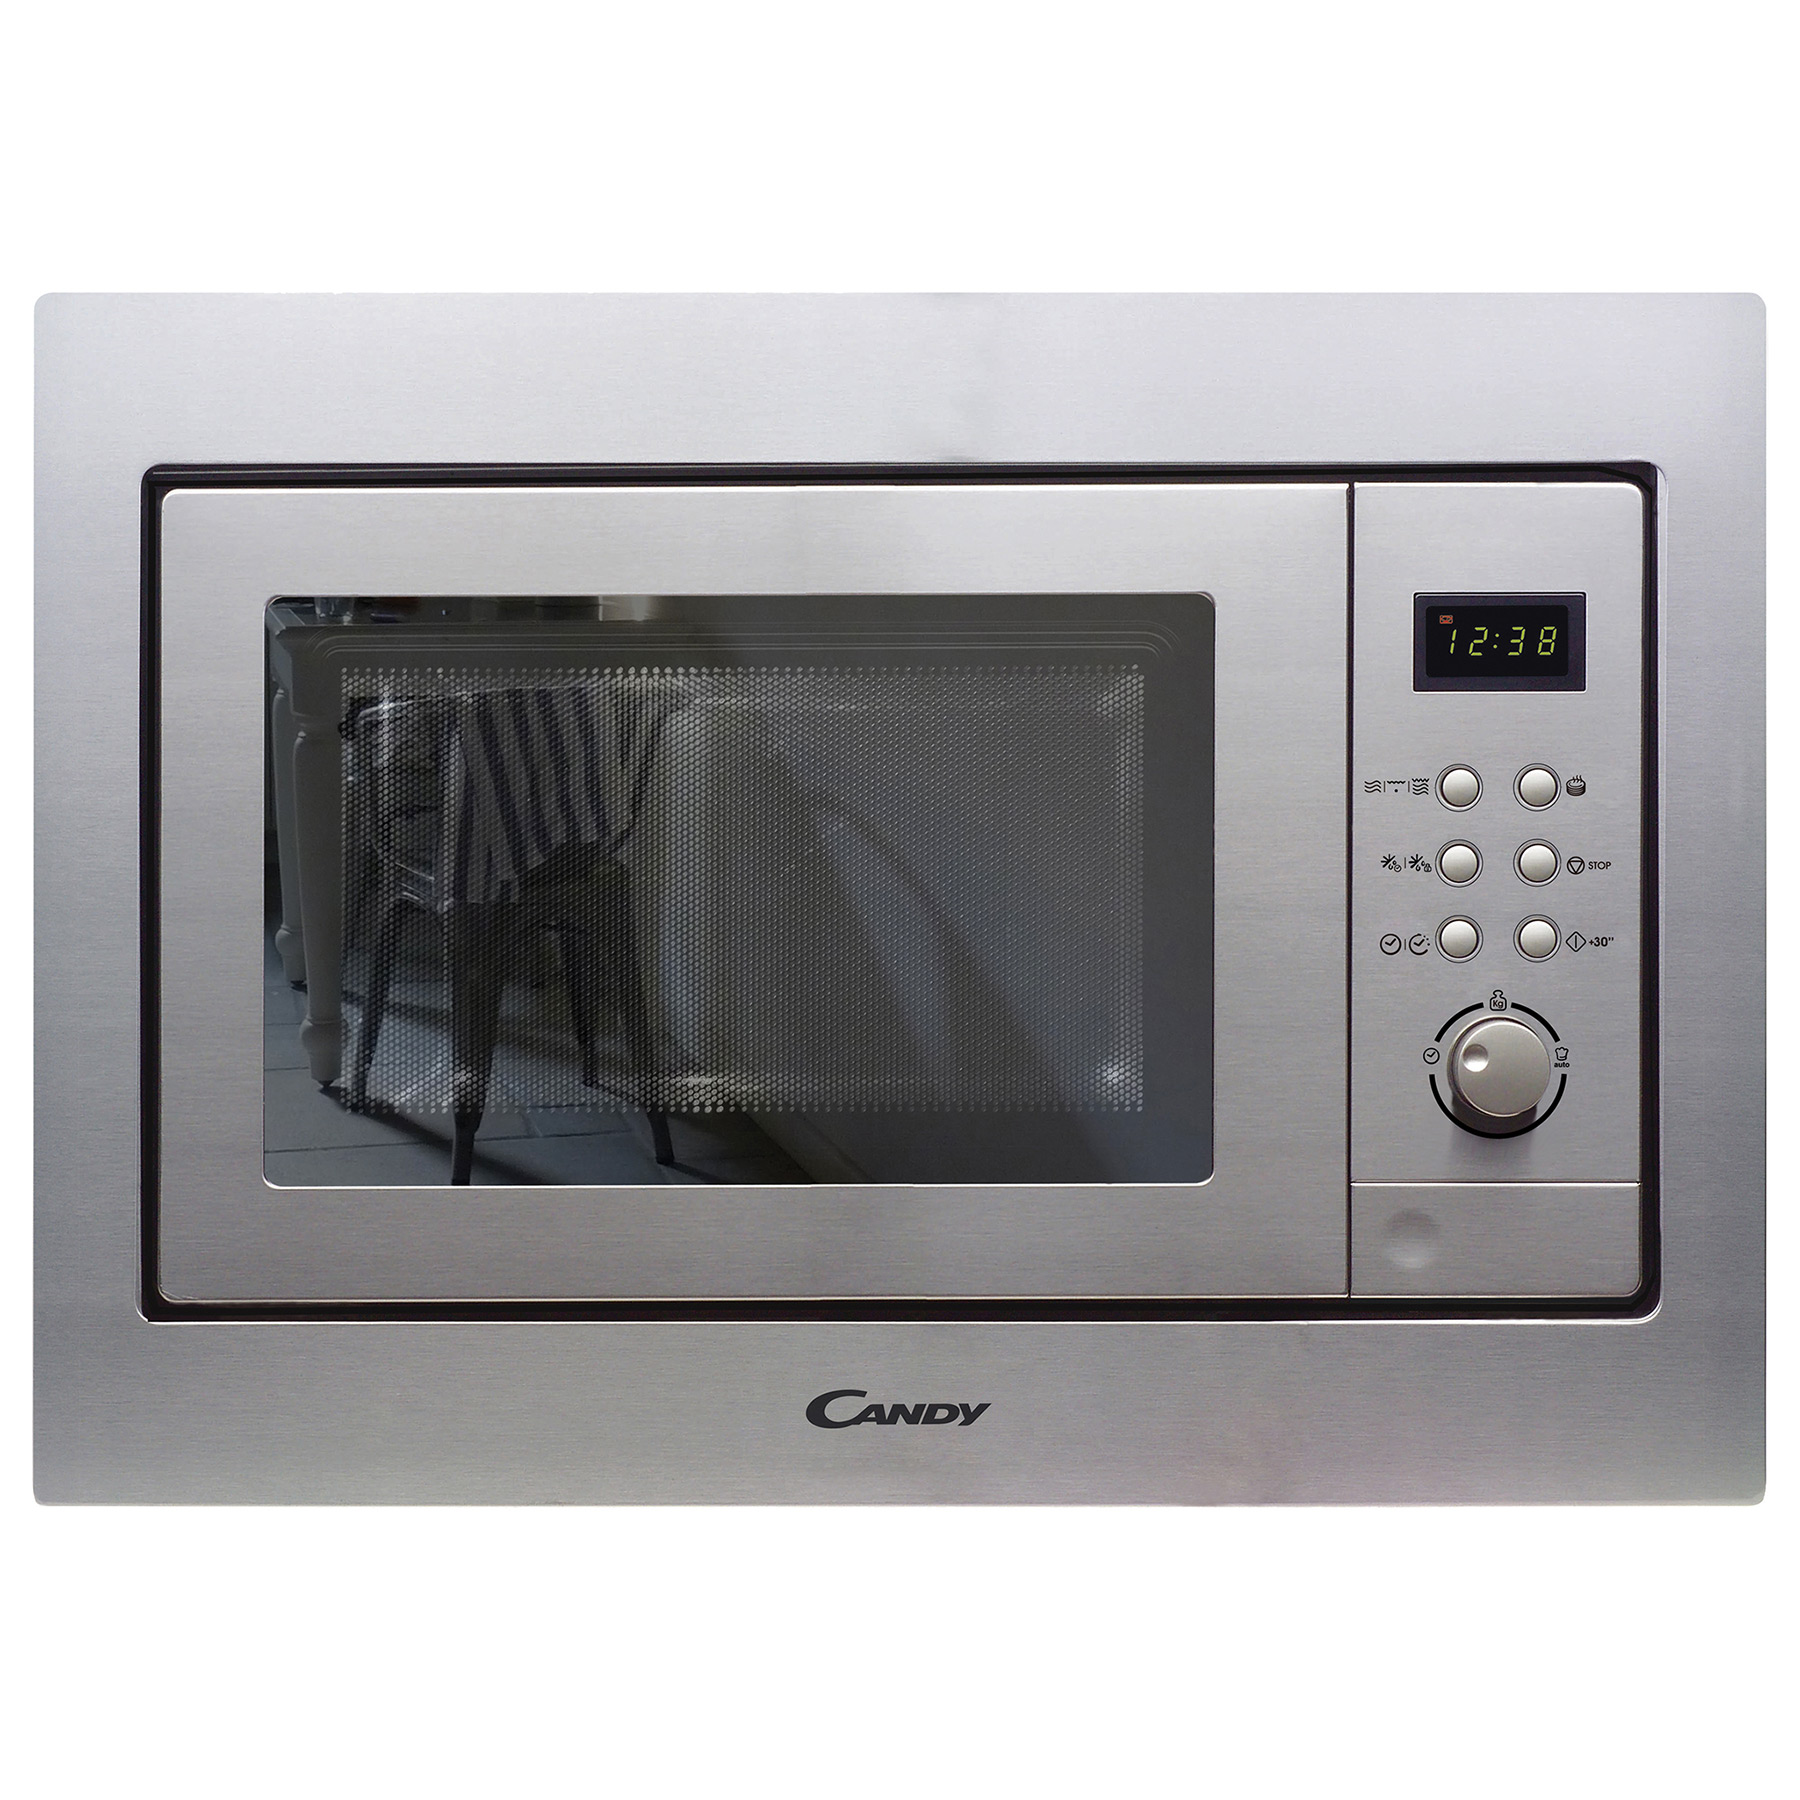 Image of Candy MICG201BUK Built In Microwave Oven with Grill in St Steel 20L 80